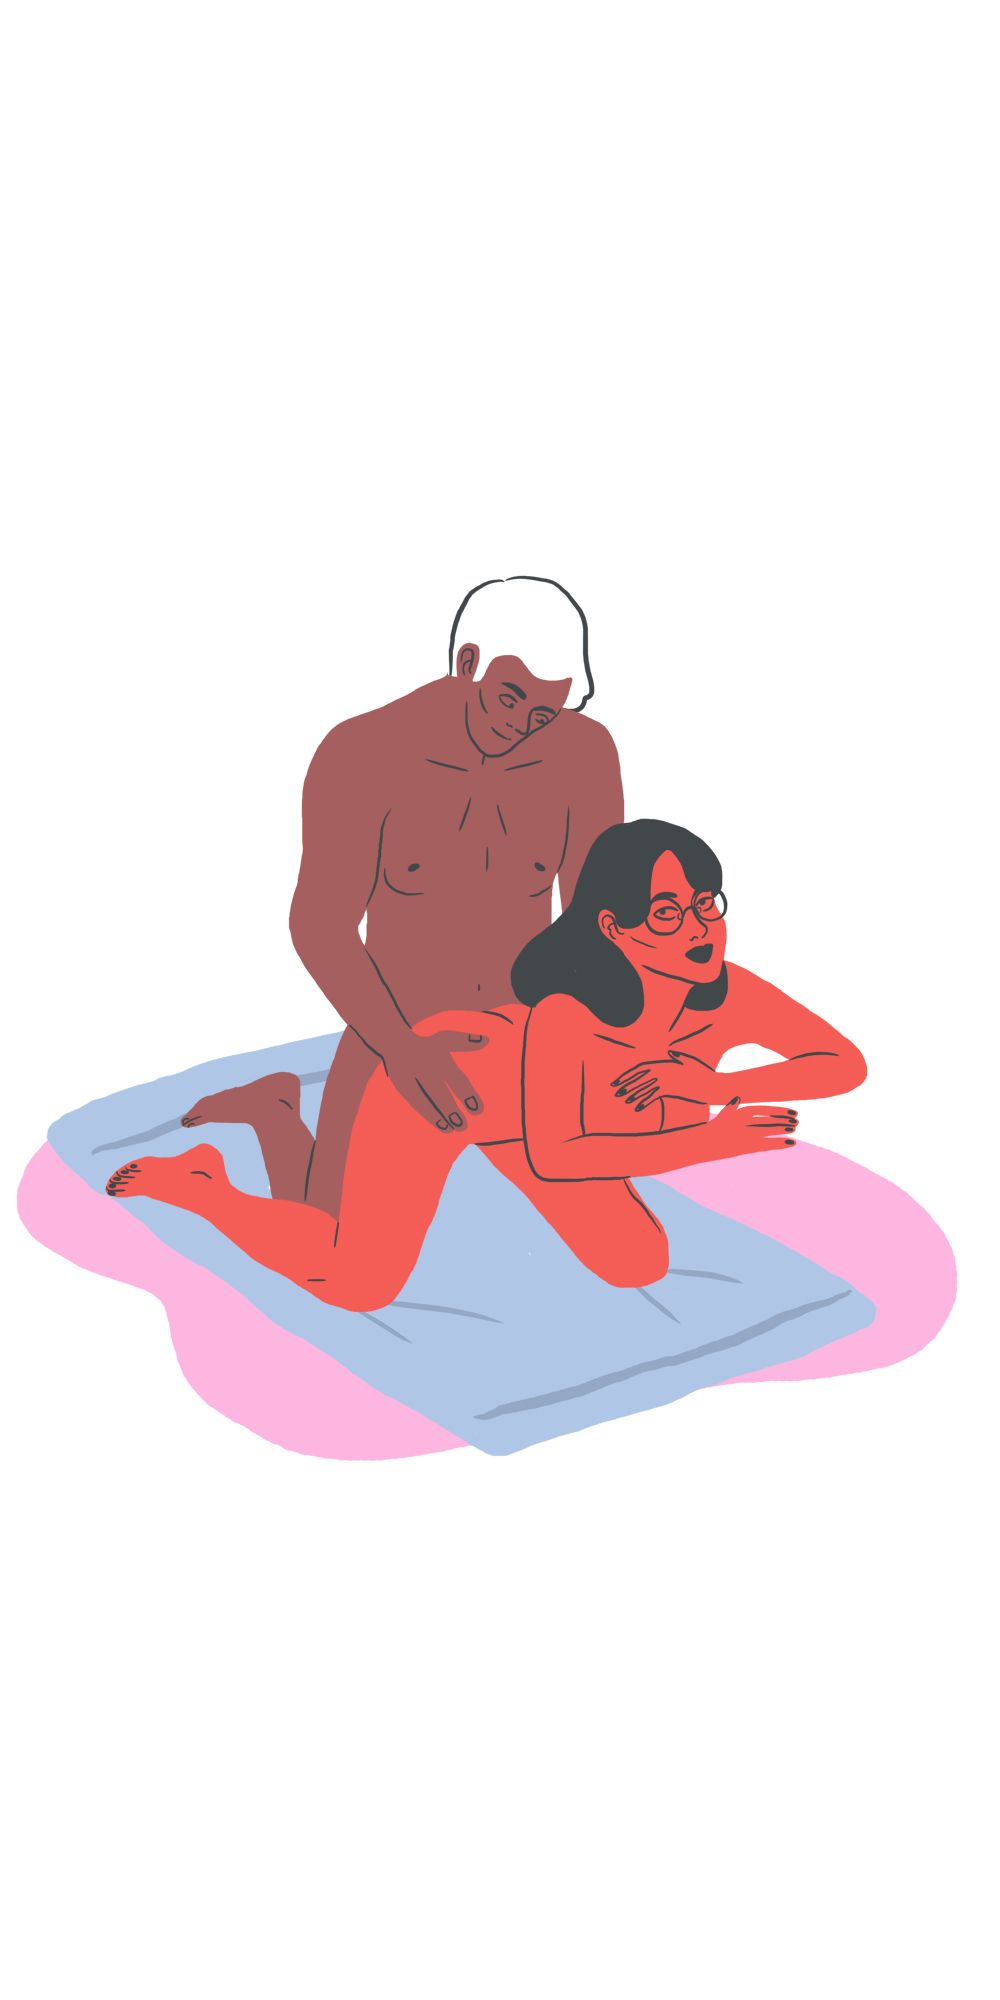 8 Hot Tub Sex Positions That Wont Give You a Damn image image